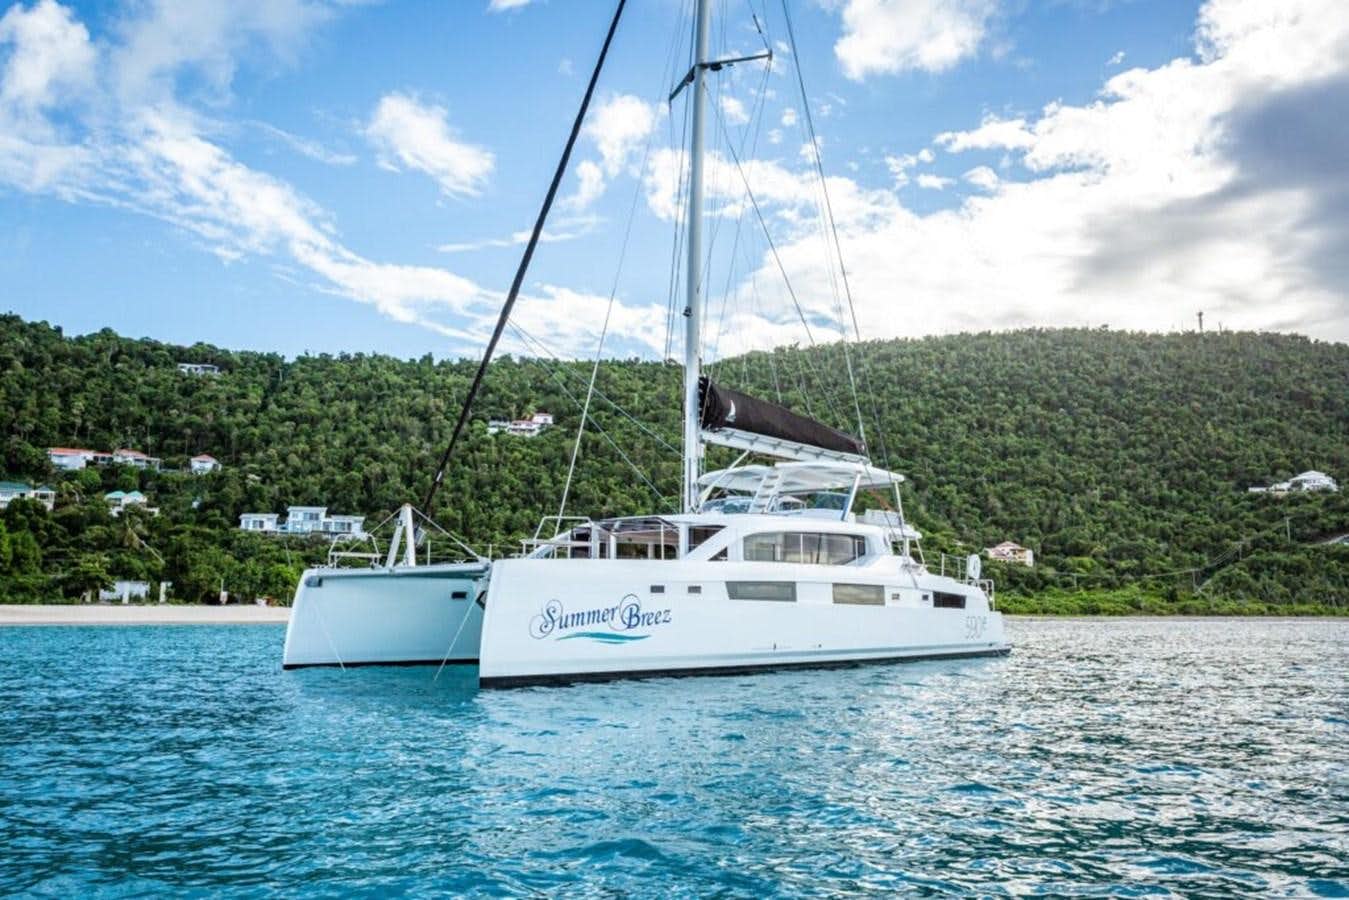 2024 voyage 590
Yacht for Sale